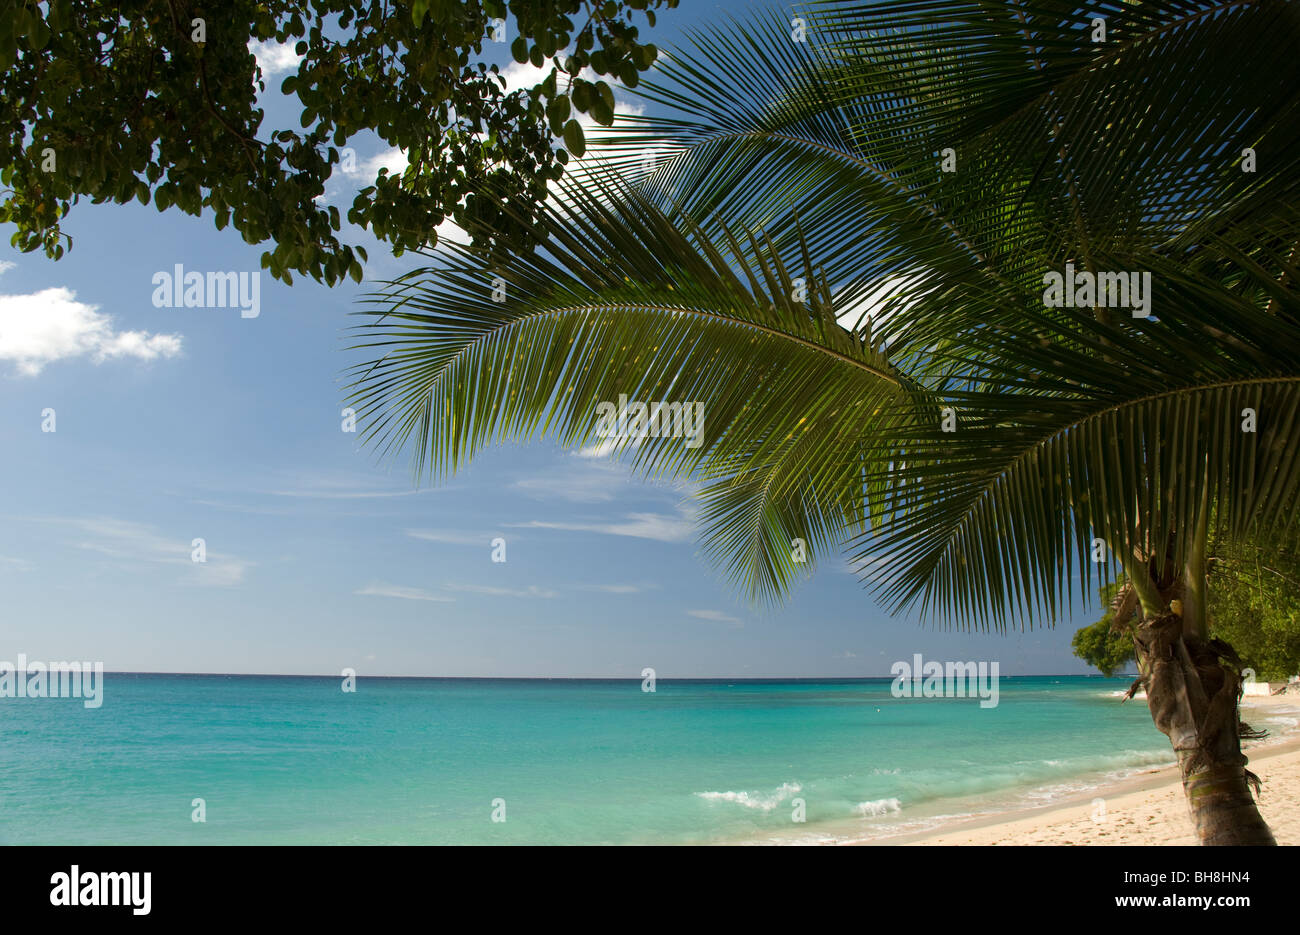 A palm tree growing on the beach at Gibb's Bay on the West Coast of Barbados Stock Photo